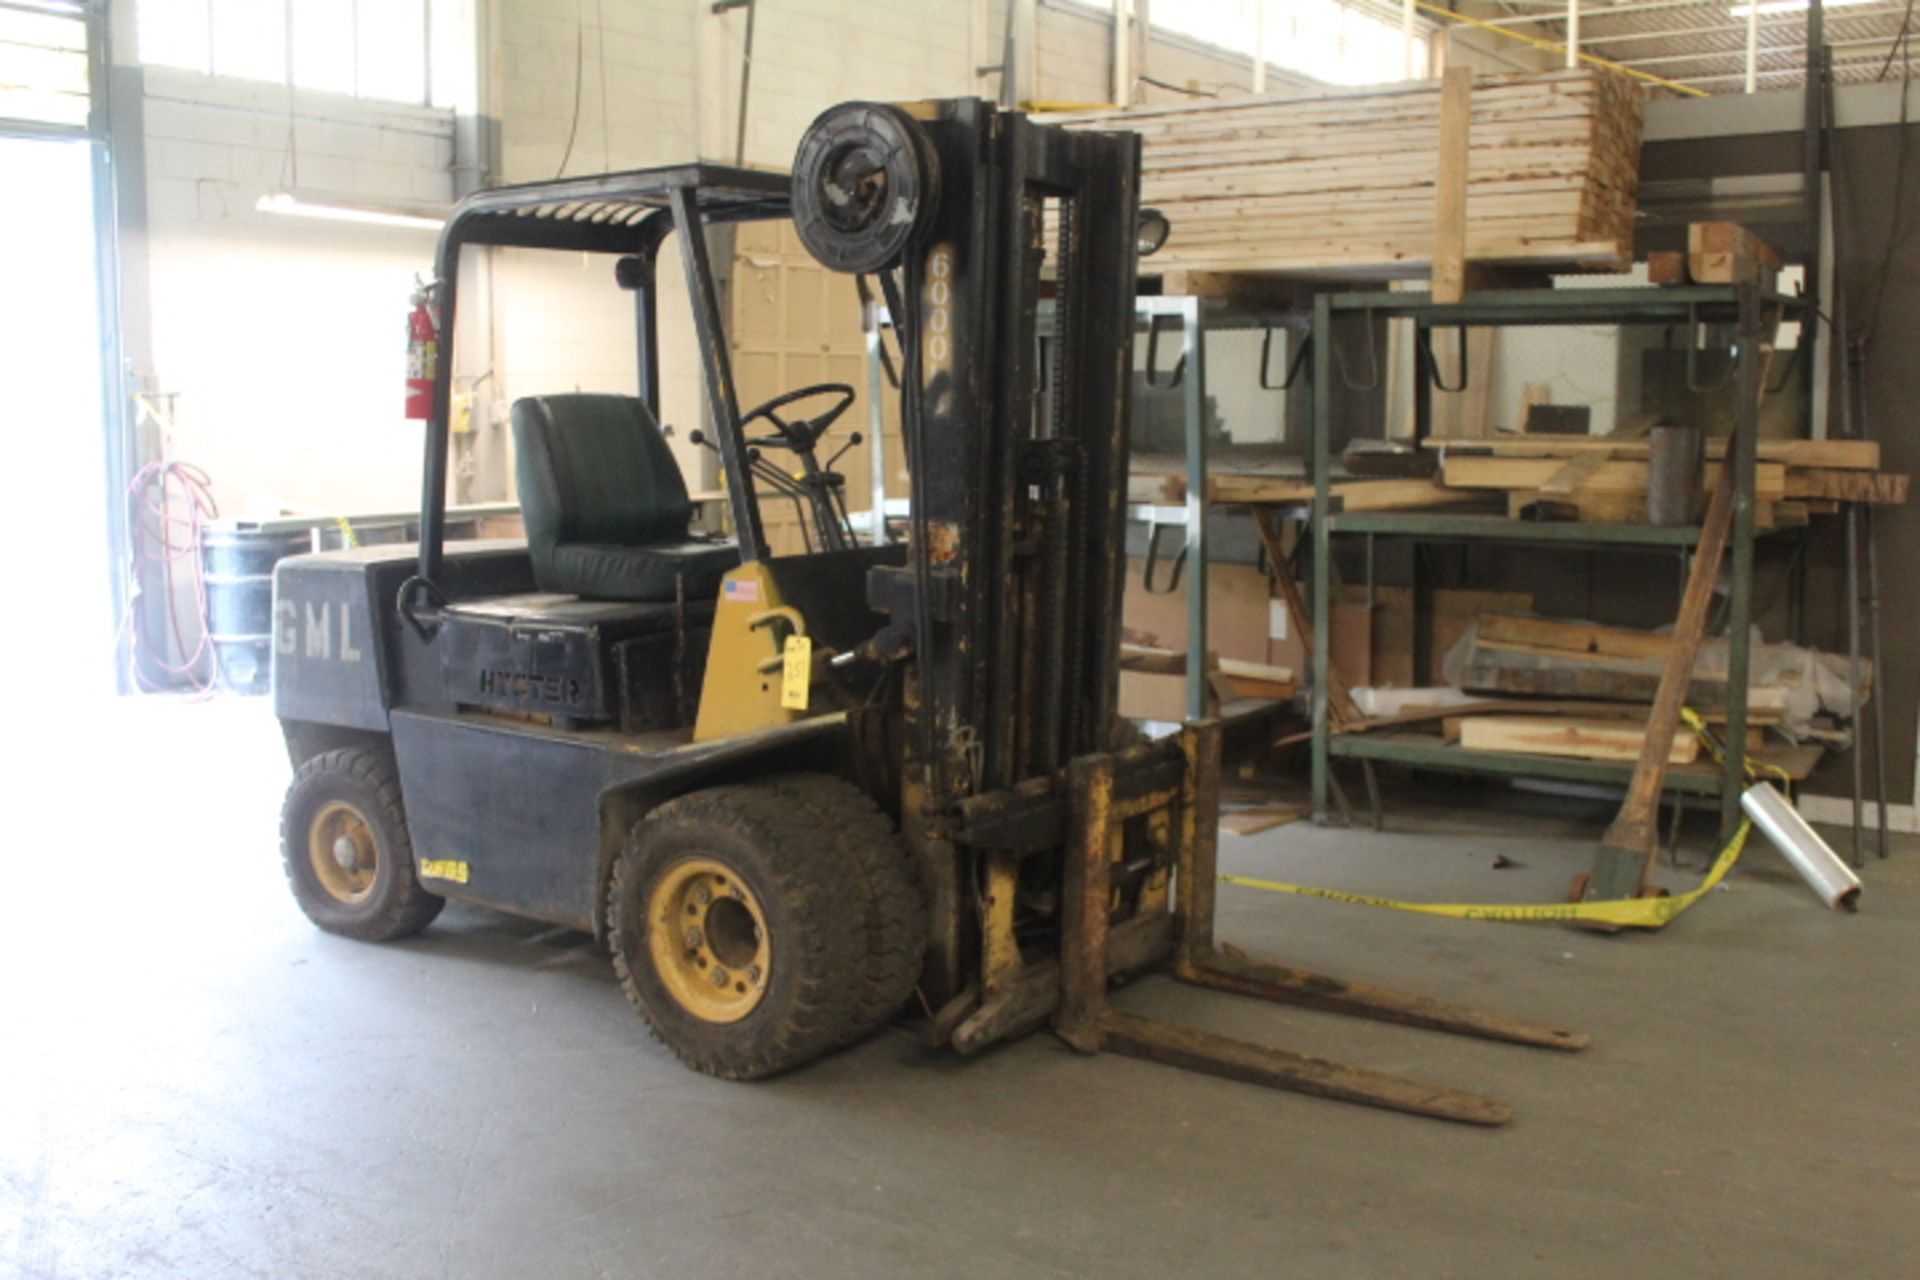 HYSTER DOUBLE PNEUM TIRE GAS FORK LIFT Model H60XL 21,548 Hours TPL